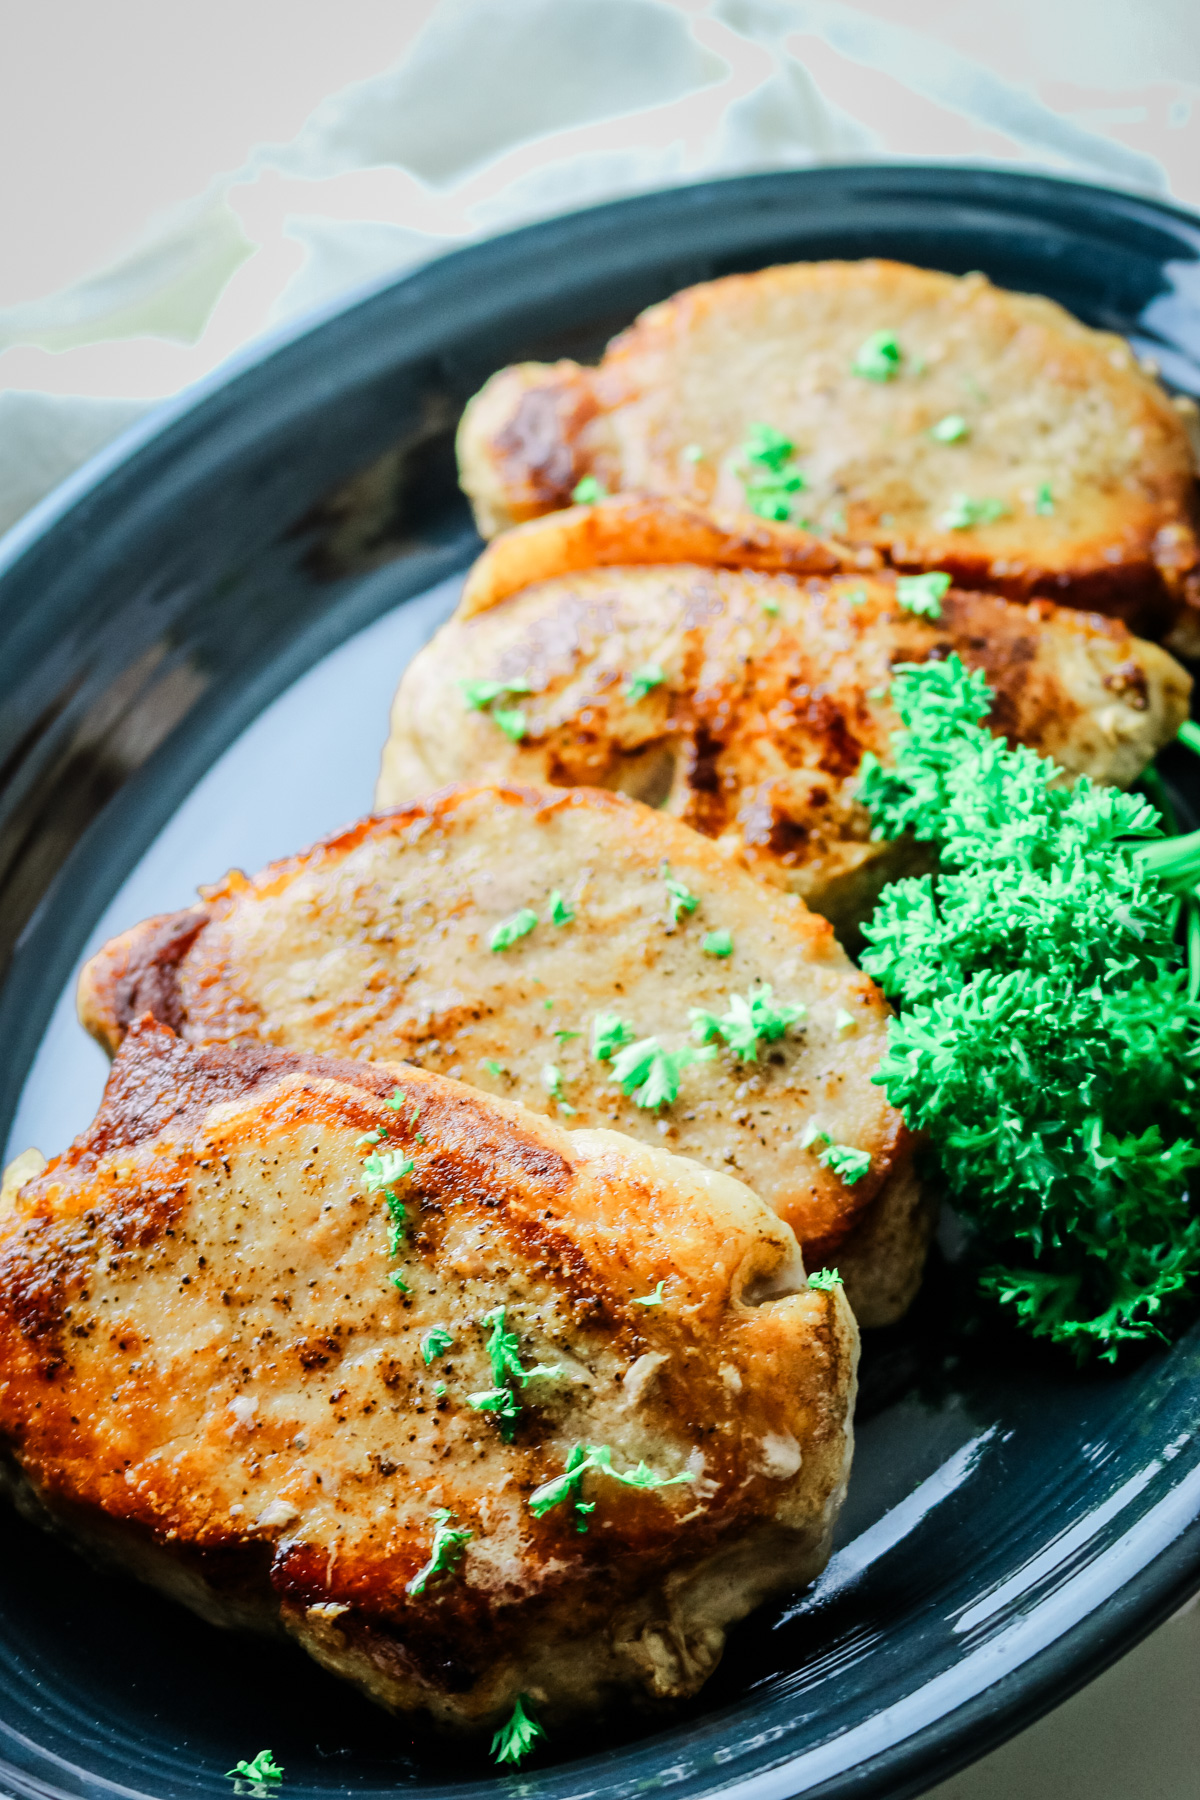 seared pork chops on a platter with parsley on the right of the platter.